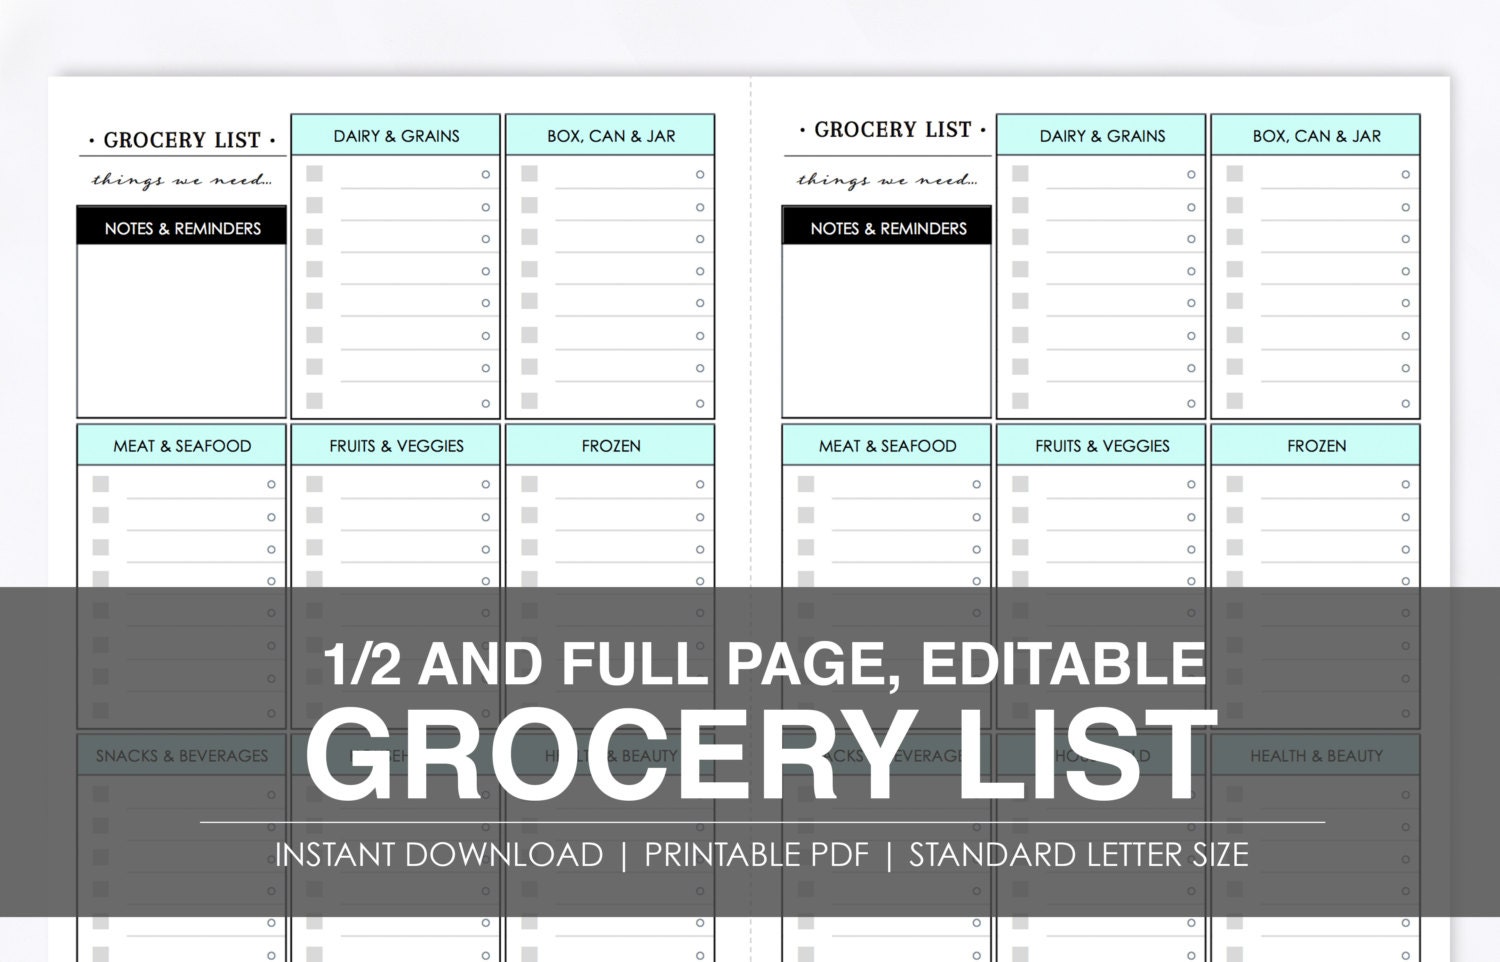 EDITABLE SHOPPING LIST Printable Instant Download by DayPlanned